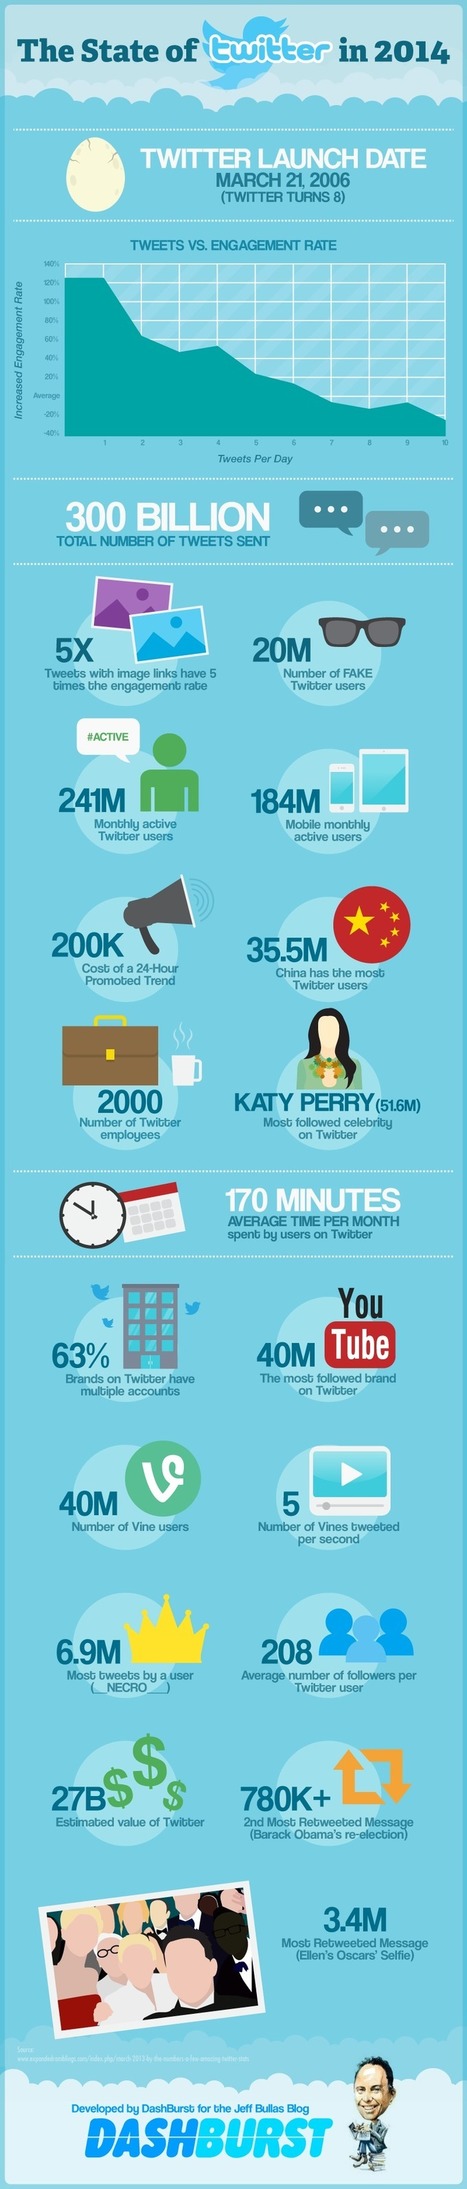 15 Twitter Facts and Figures for 2014 You Need to Know - Jeffbullas's Blog | World's Best Infographics | Scoop.it